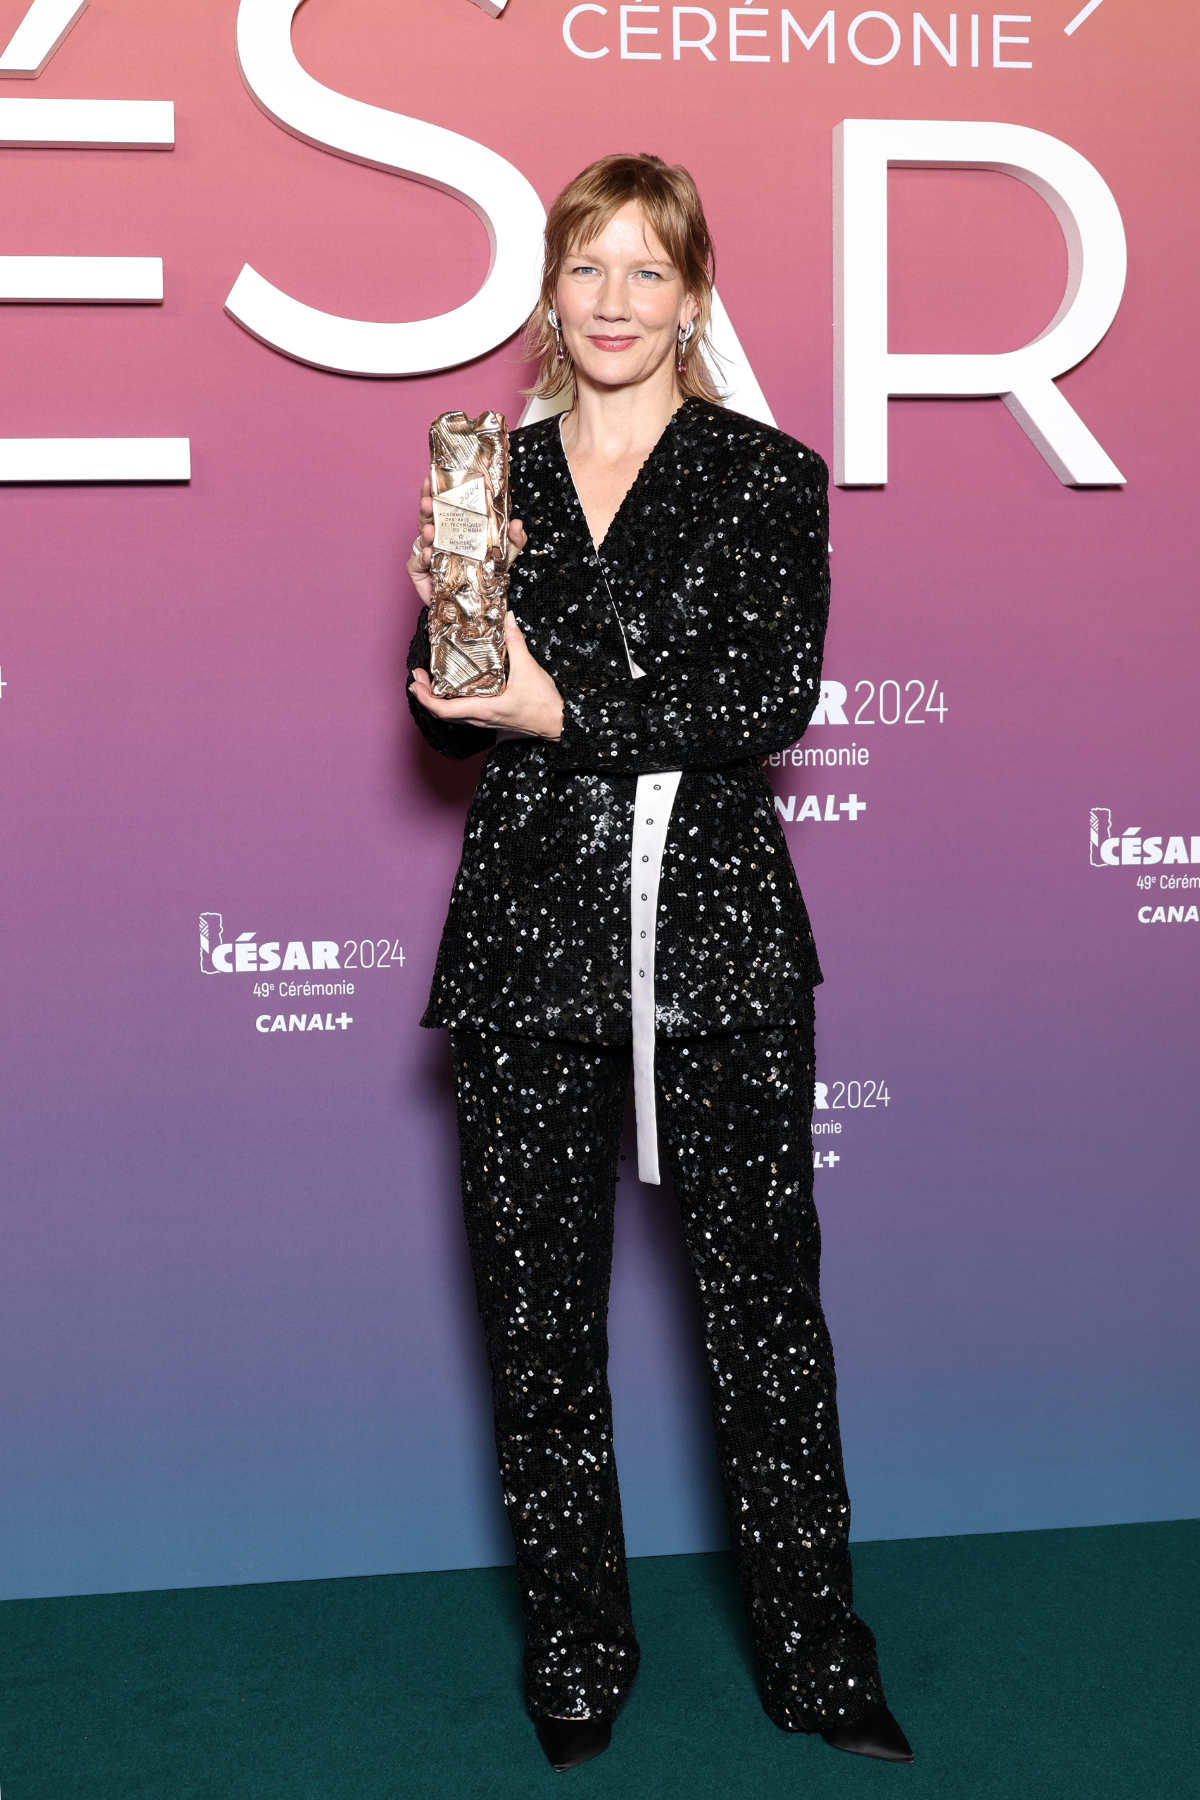 Sandra Hüller In Custom Louis Vuitton And High Jewelry At The 49th César Ceremony